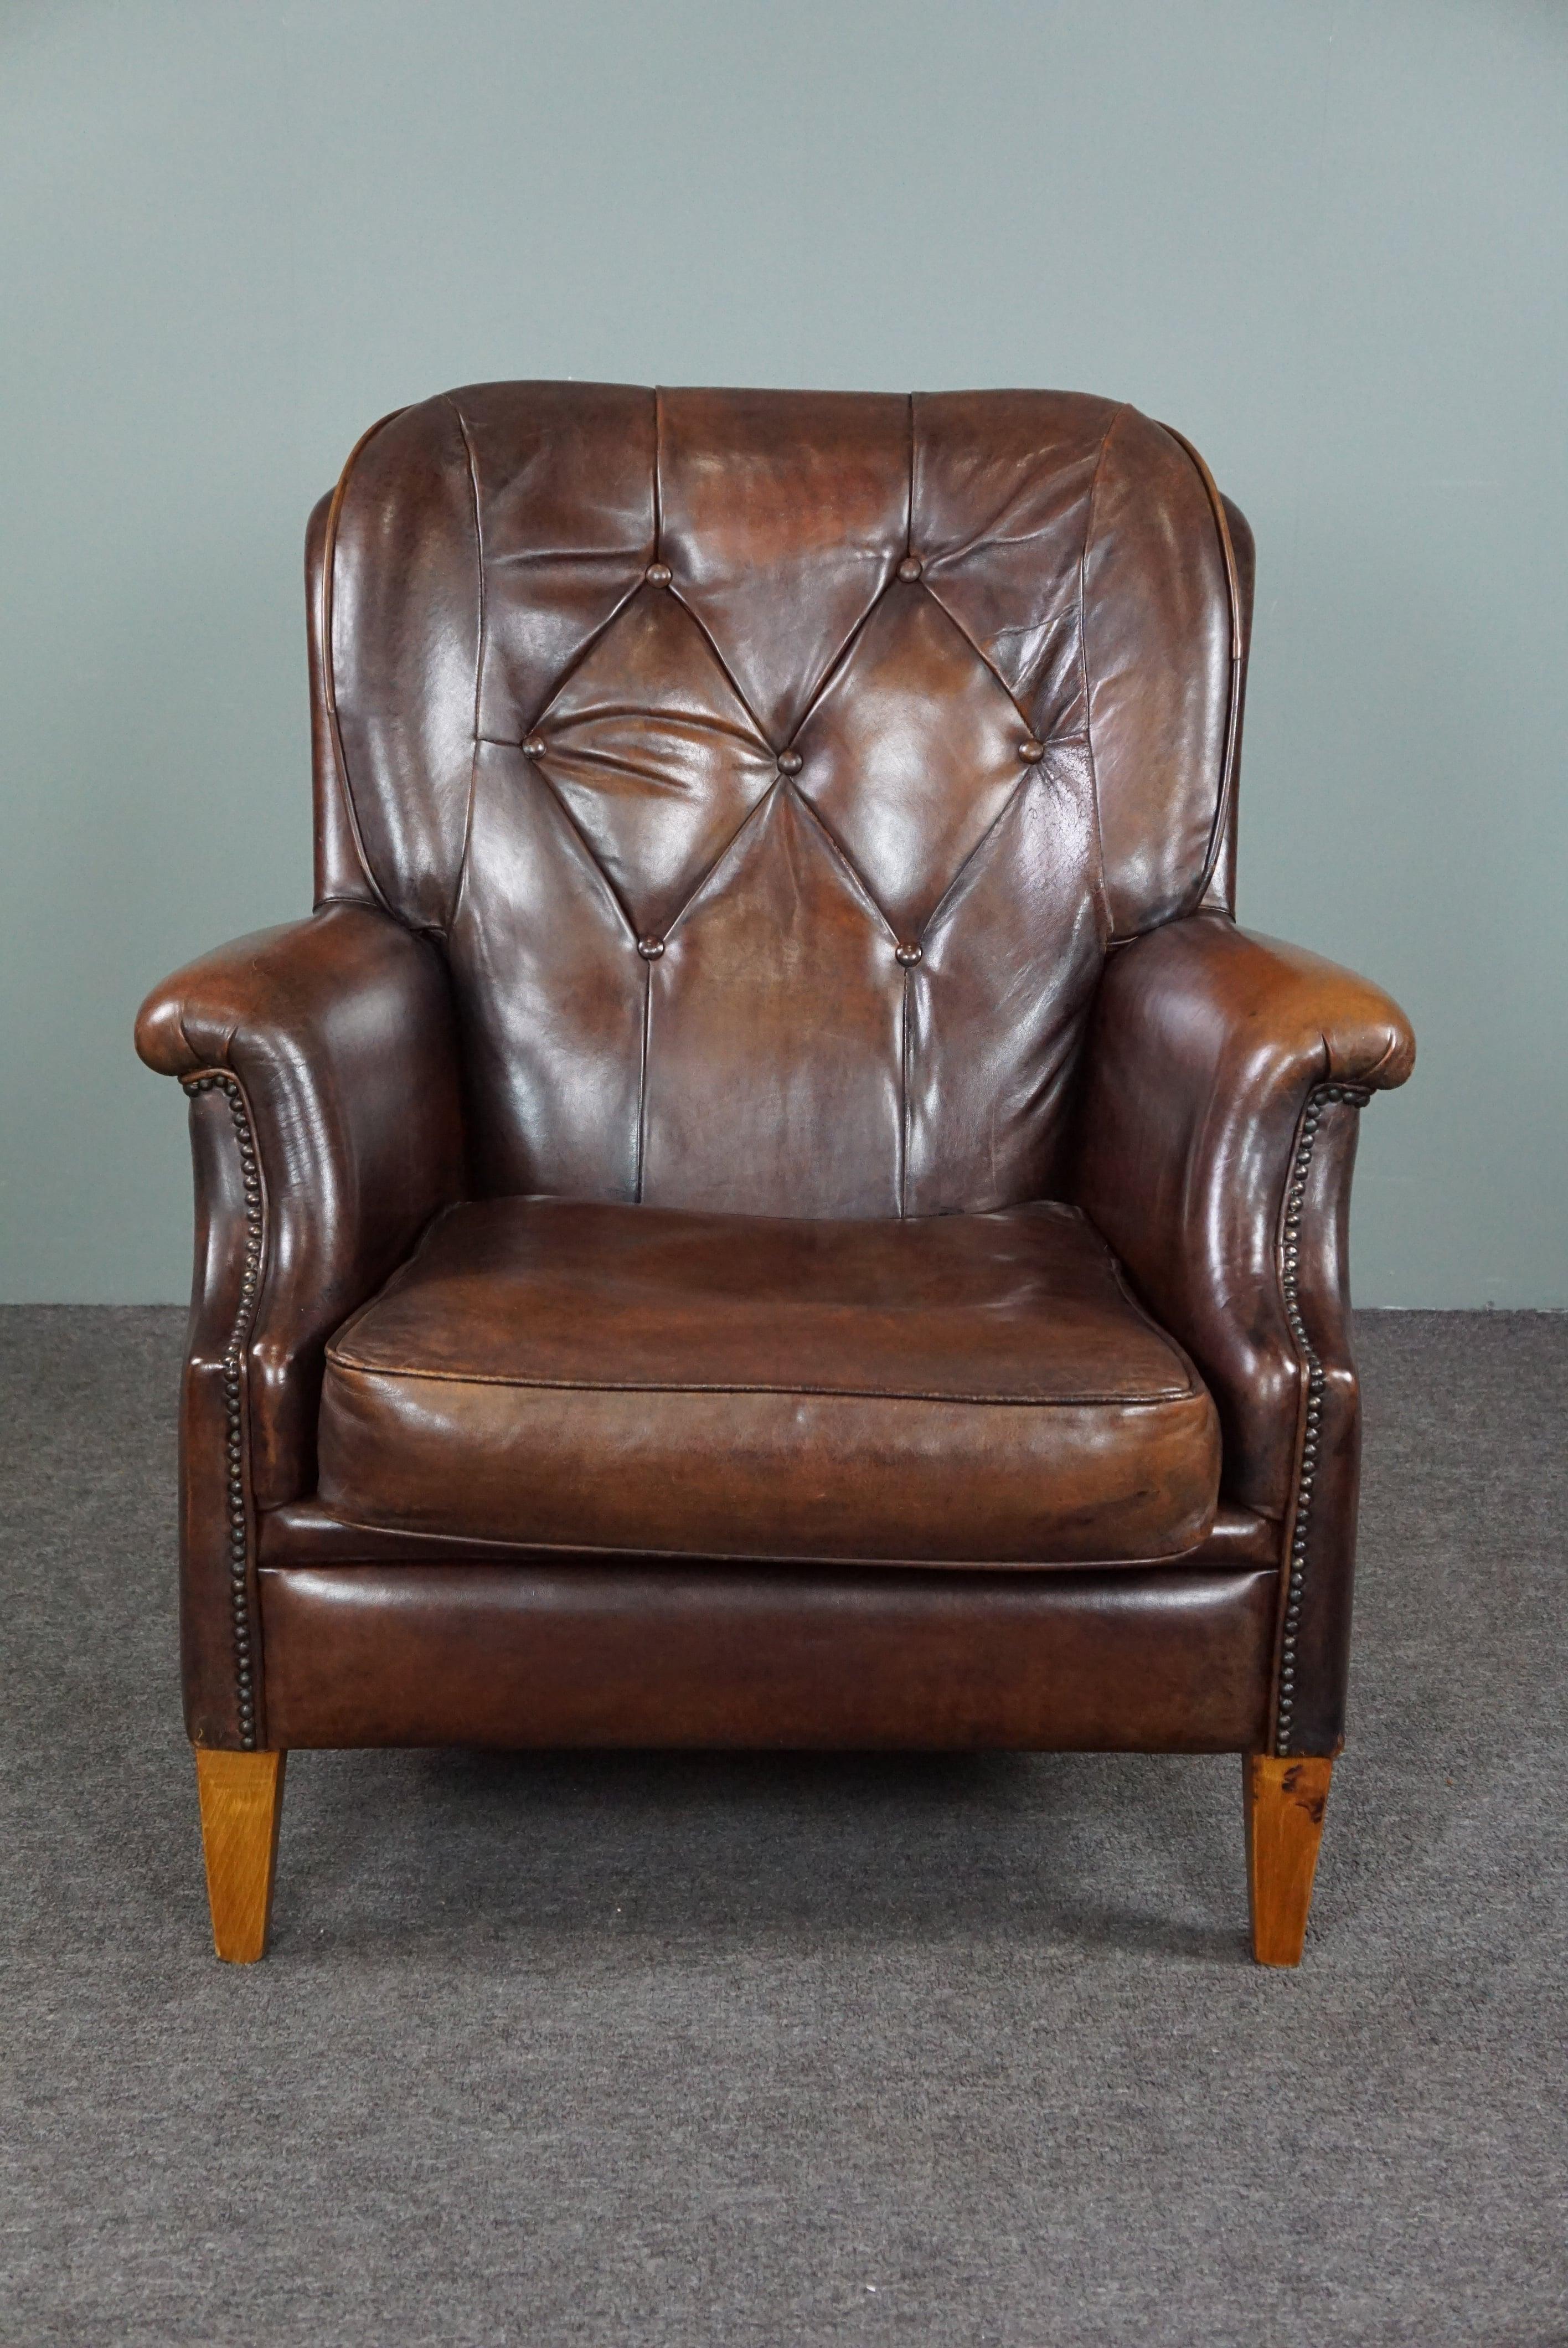 Offered is this very beautiful sheep leather armchair in a beautiful color.

This comfortable sheep leather armchair, which is in very good condition, is a real friend to everyone.
It is not a pronounced armchair, but that makes it versatile.
This